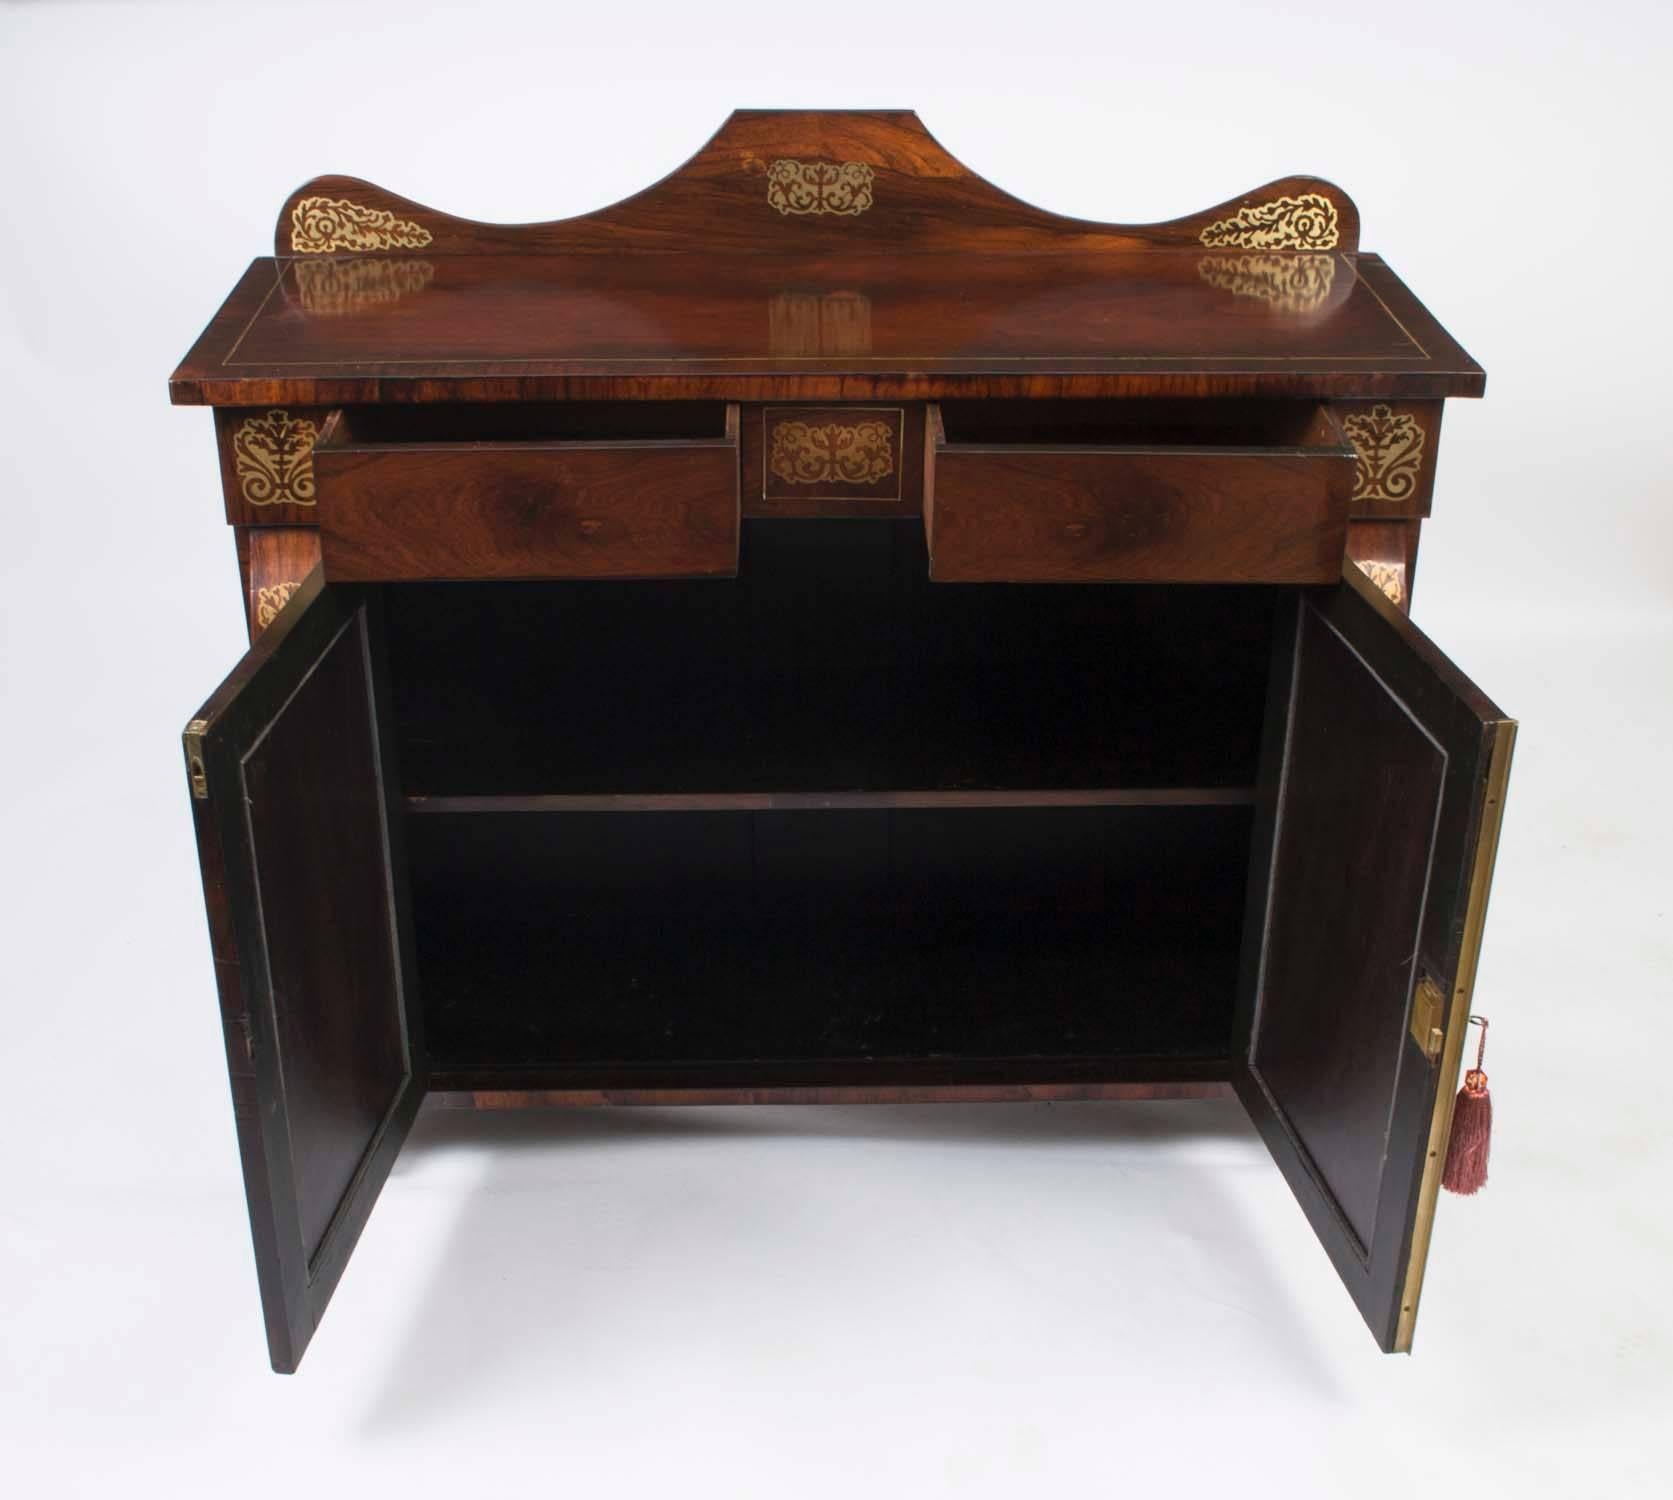 This is an elegant antique Regency period brass inlaid chiffonier, circa 1820 in date.

This magnificent cabinet has an arched shaped back and features a pair of grilled doors with powder pink silk linings that open to reveal a cupboard with a